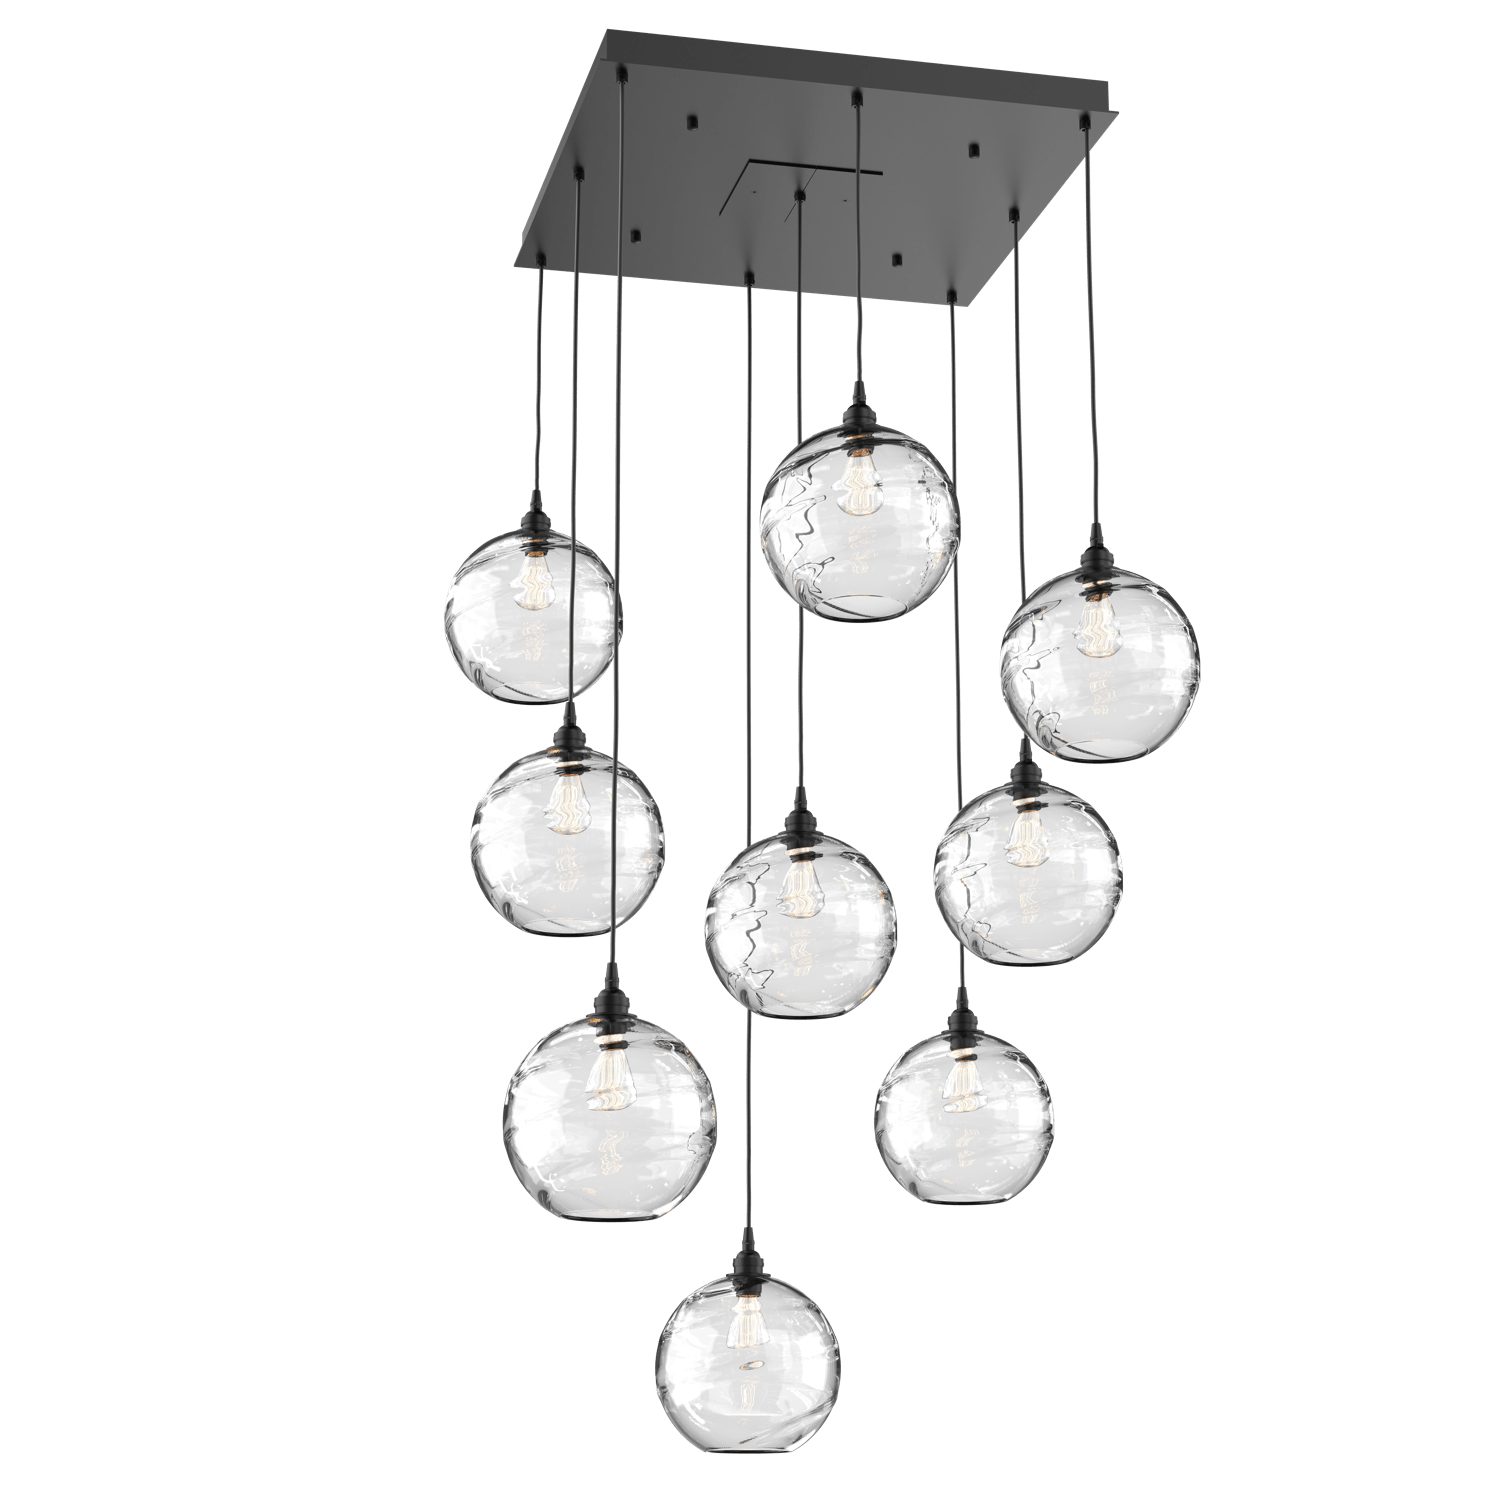 CHB0047-09-MB-OC-Hammerton-Studio-Optic-Blown-Glass-Terra-9-light-square-pendant-chandelier-with-matte-black-finish-and-optic-clear-blown-glass-shades-and-incandescent-lamping